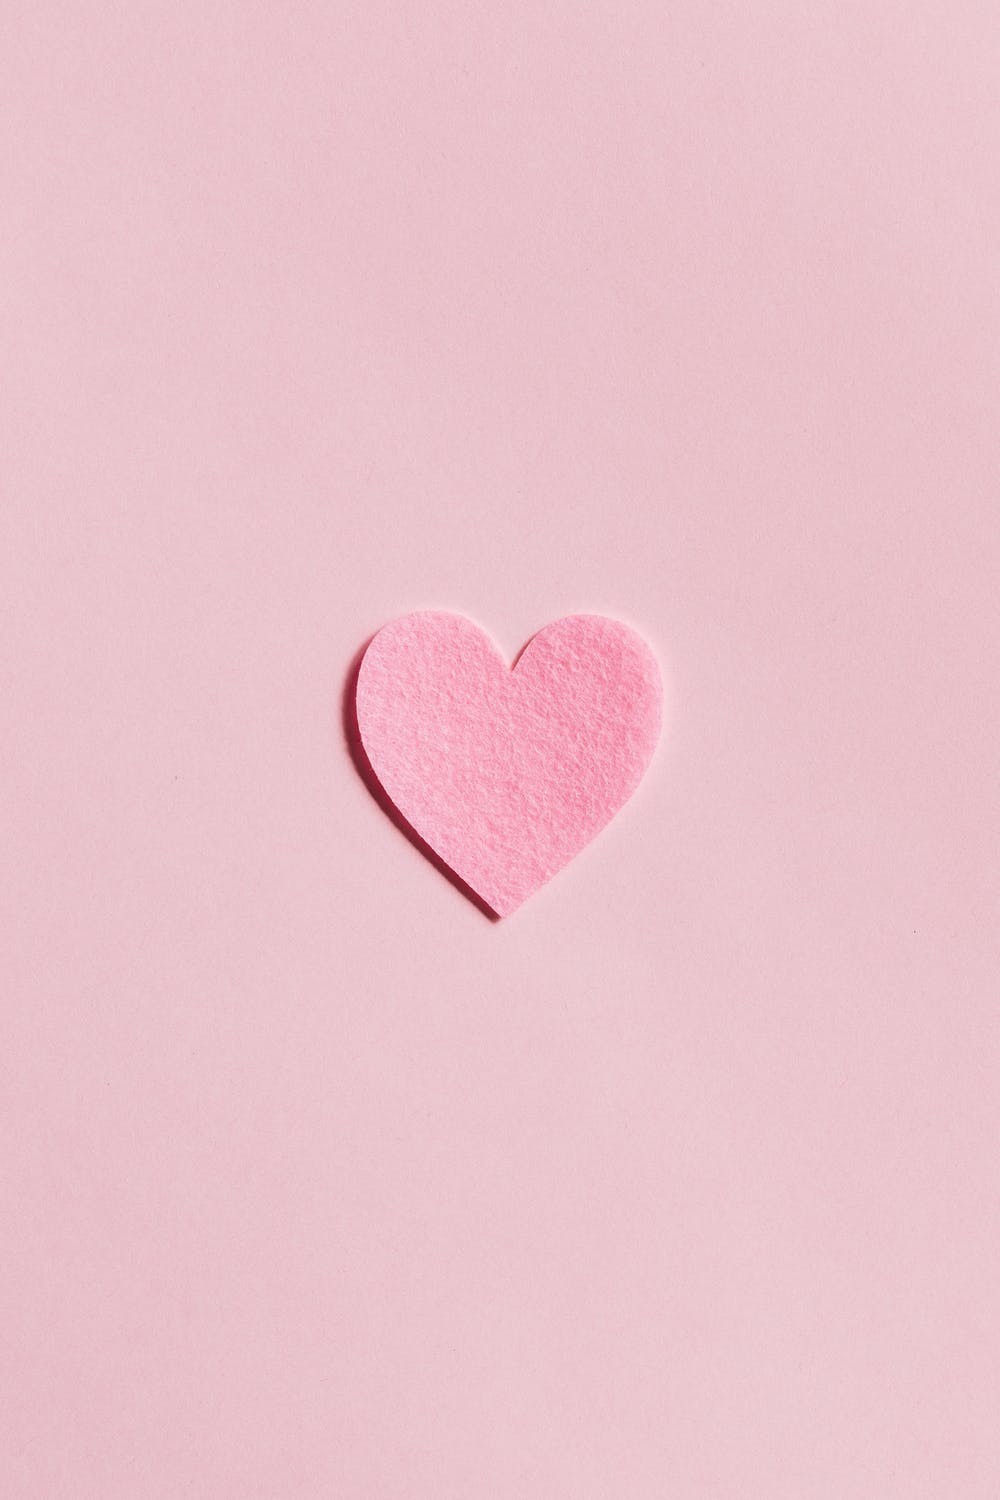 Cute Valentine's Day Wallpaper For iPhone (Free Download!)